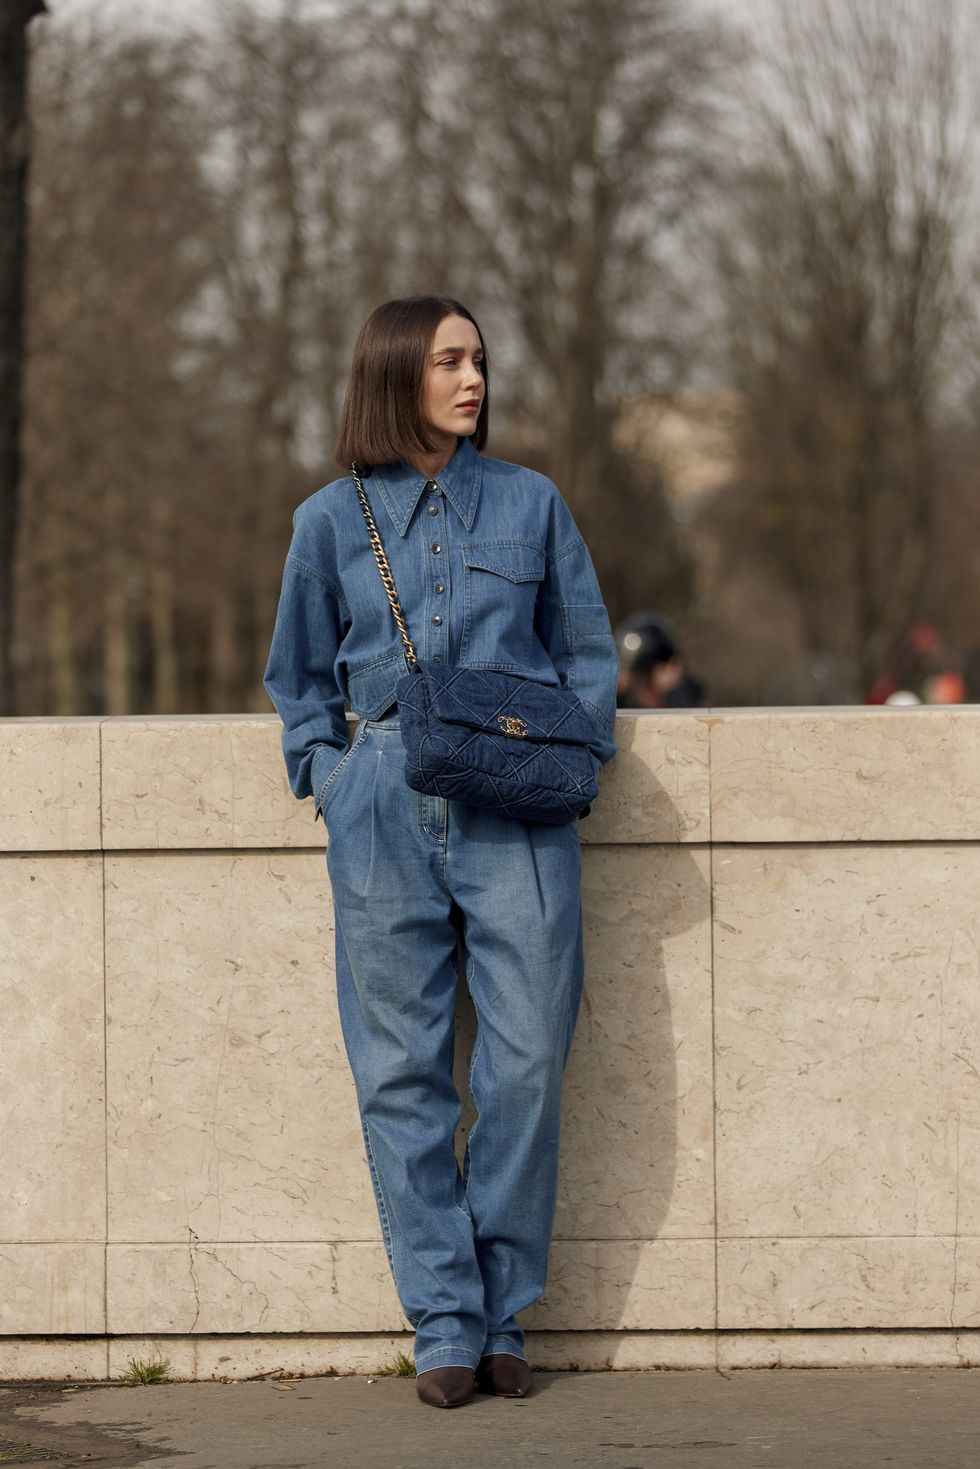 Denim, Jeans, Clothing, Street fashion, Blue, Fashion, Textile, Standing, Jacket, Overall, 